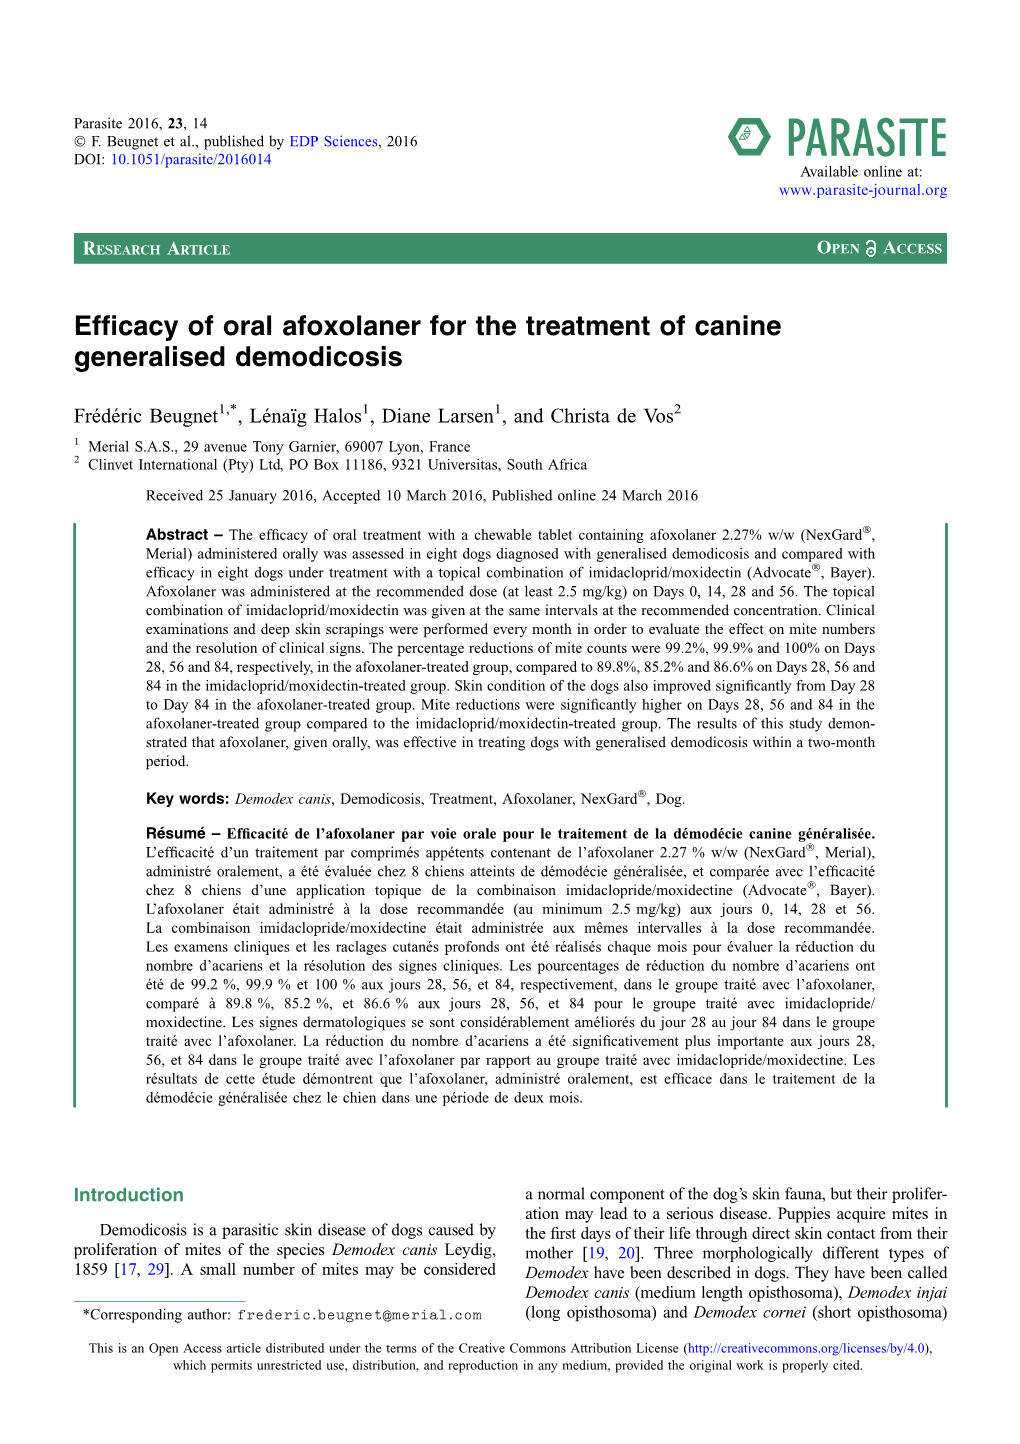 Efficacy of Oral Afoxolaner for the Treatment of Canine Generalised Demodicosis